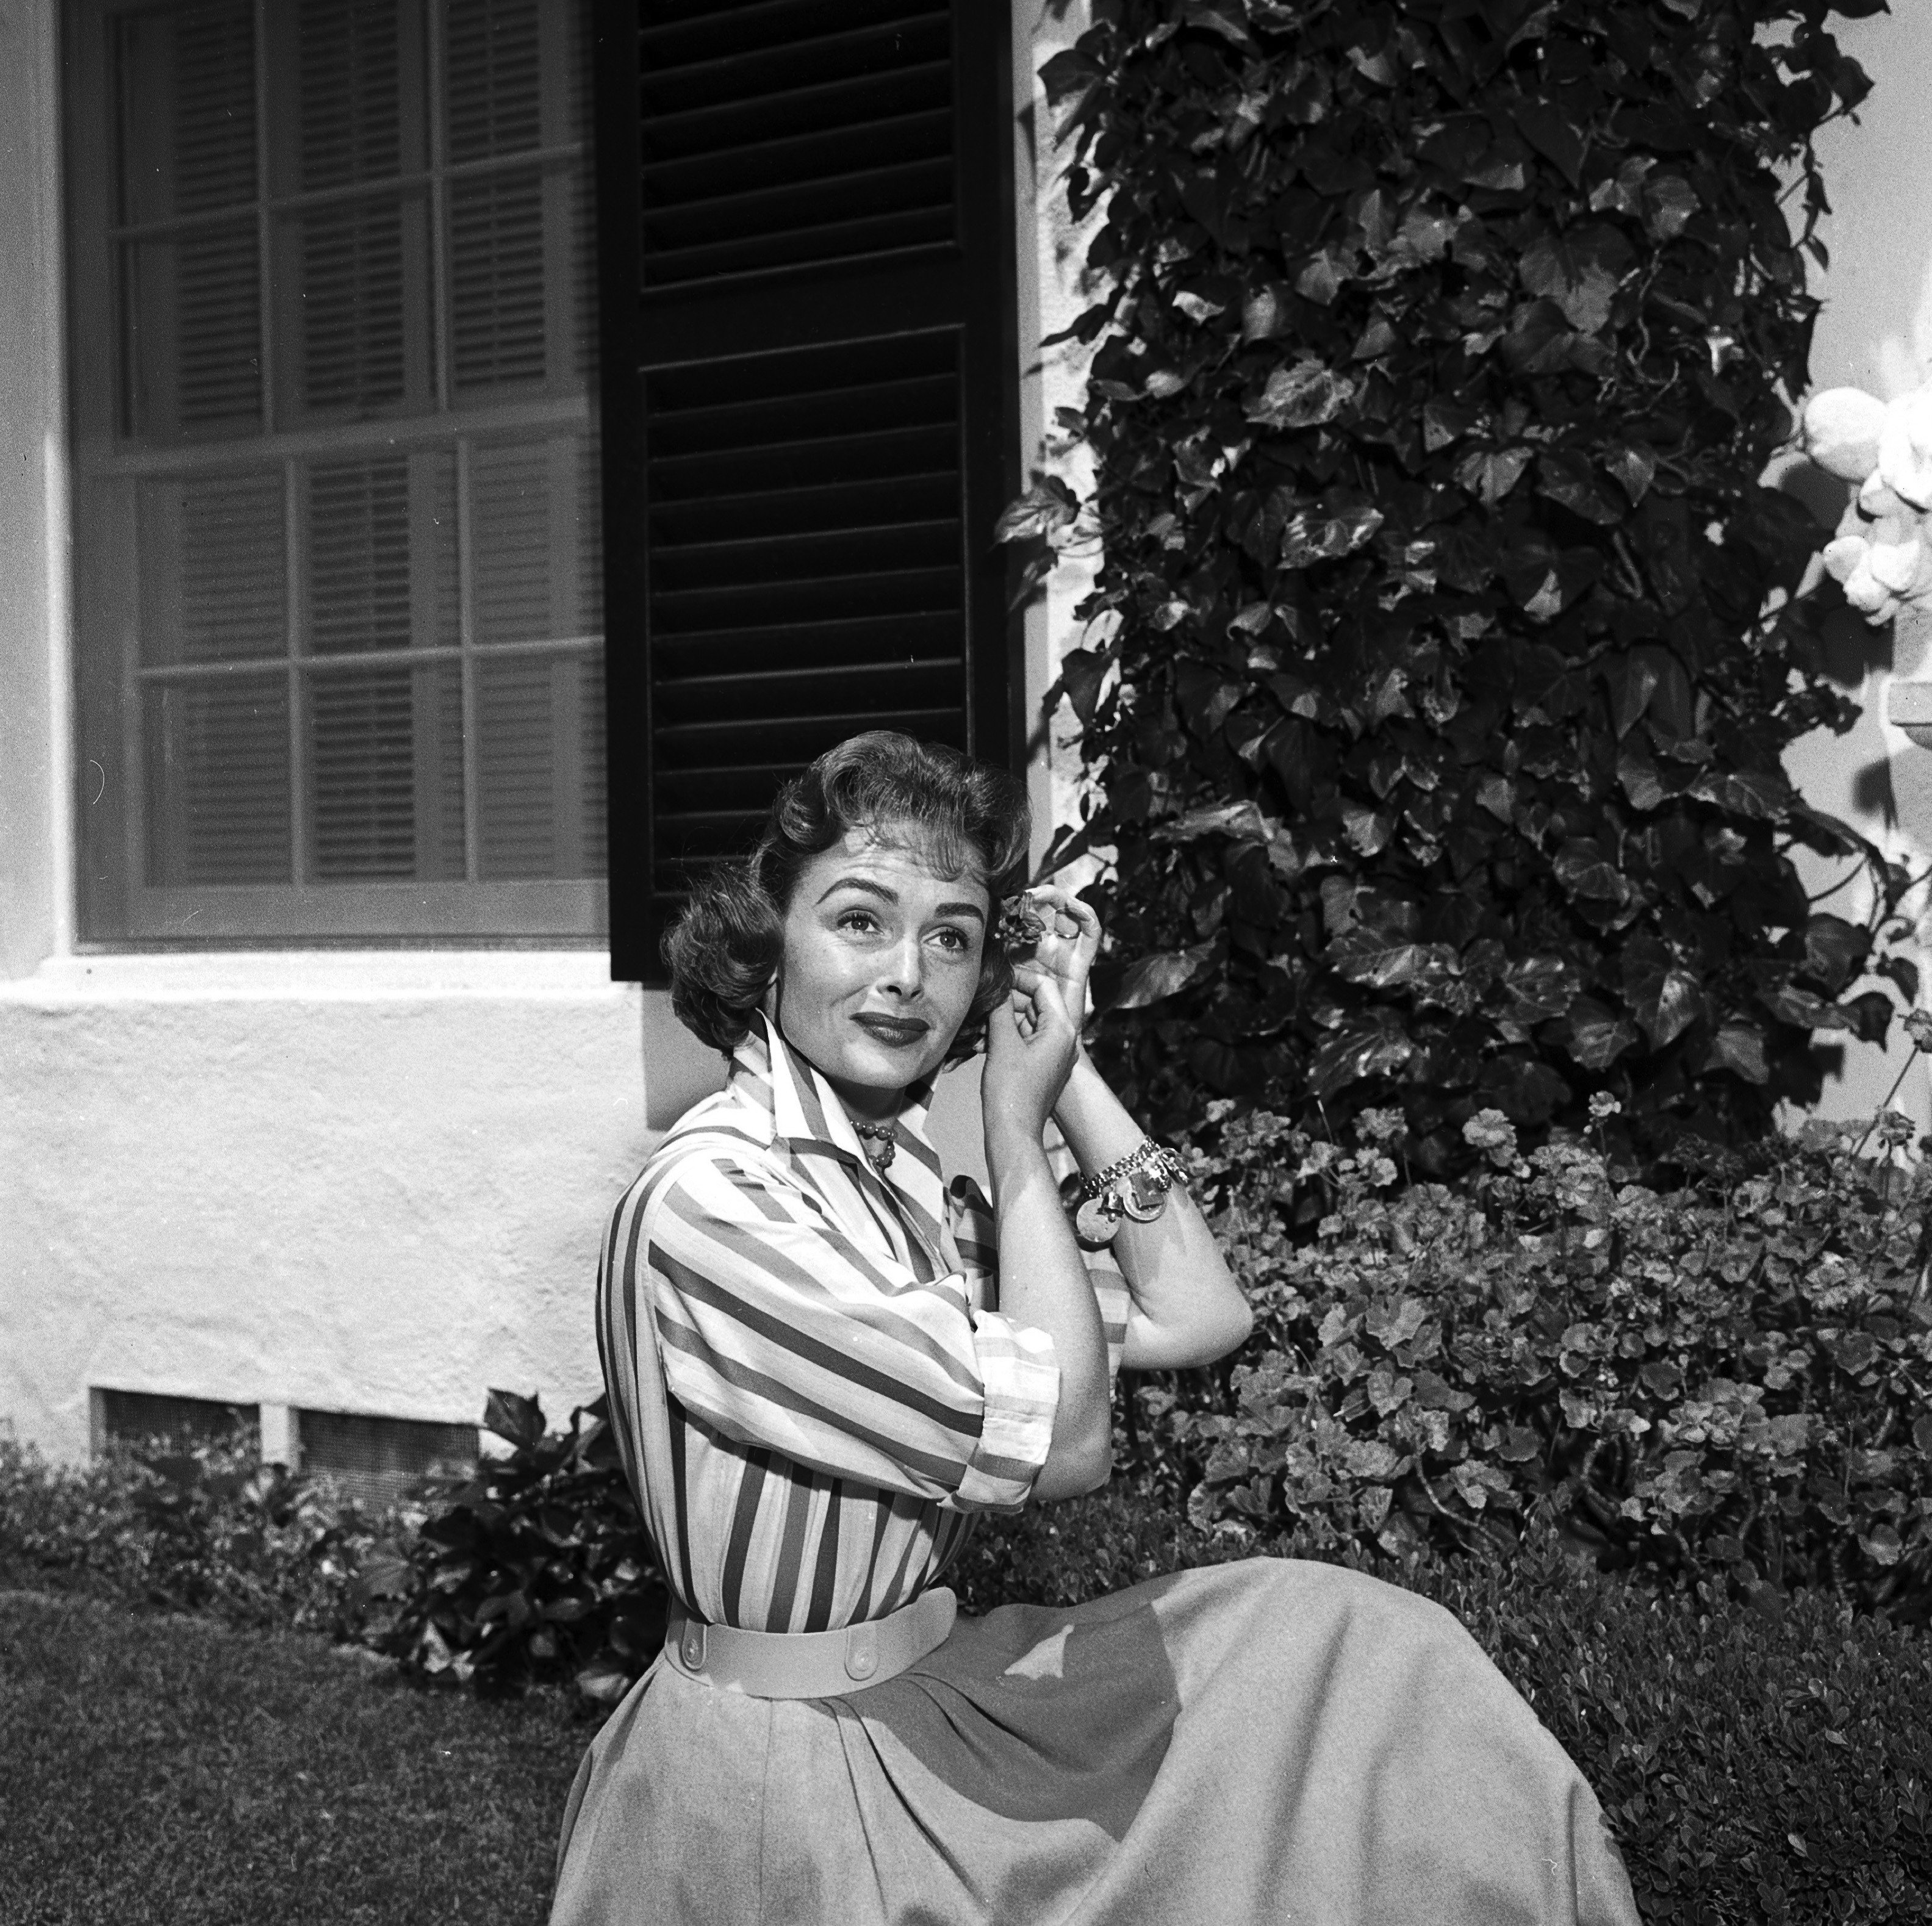 Actress Donna Reed on the set of "The Donna Reed Show" on June 6, 1958. | Source: Getty Images